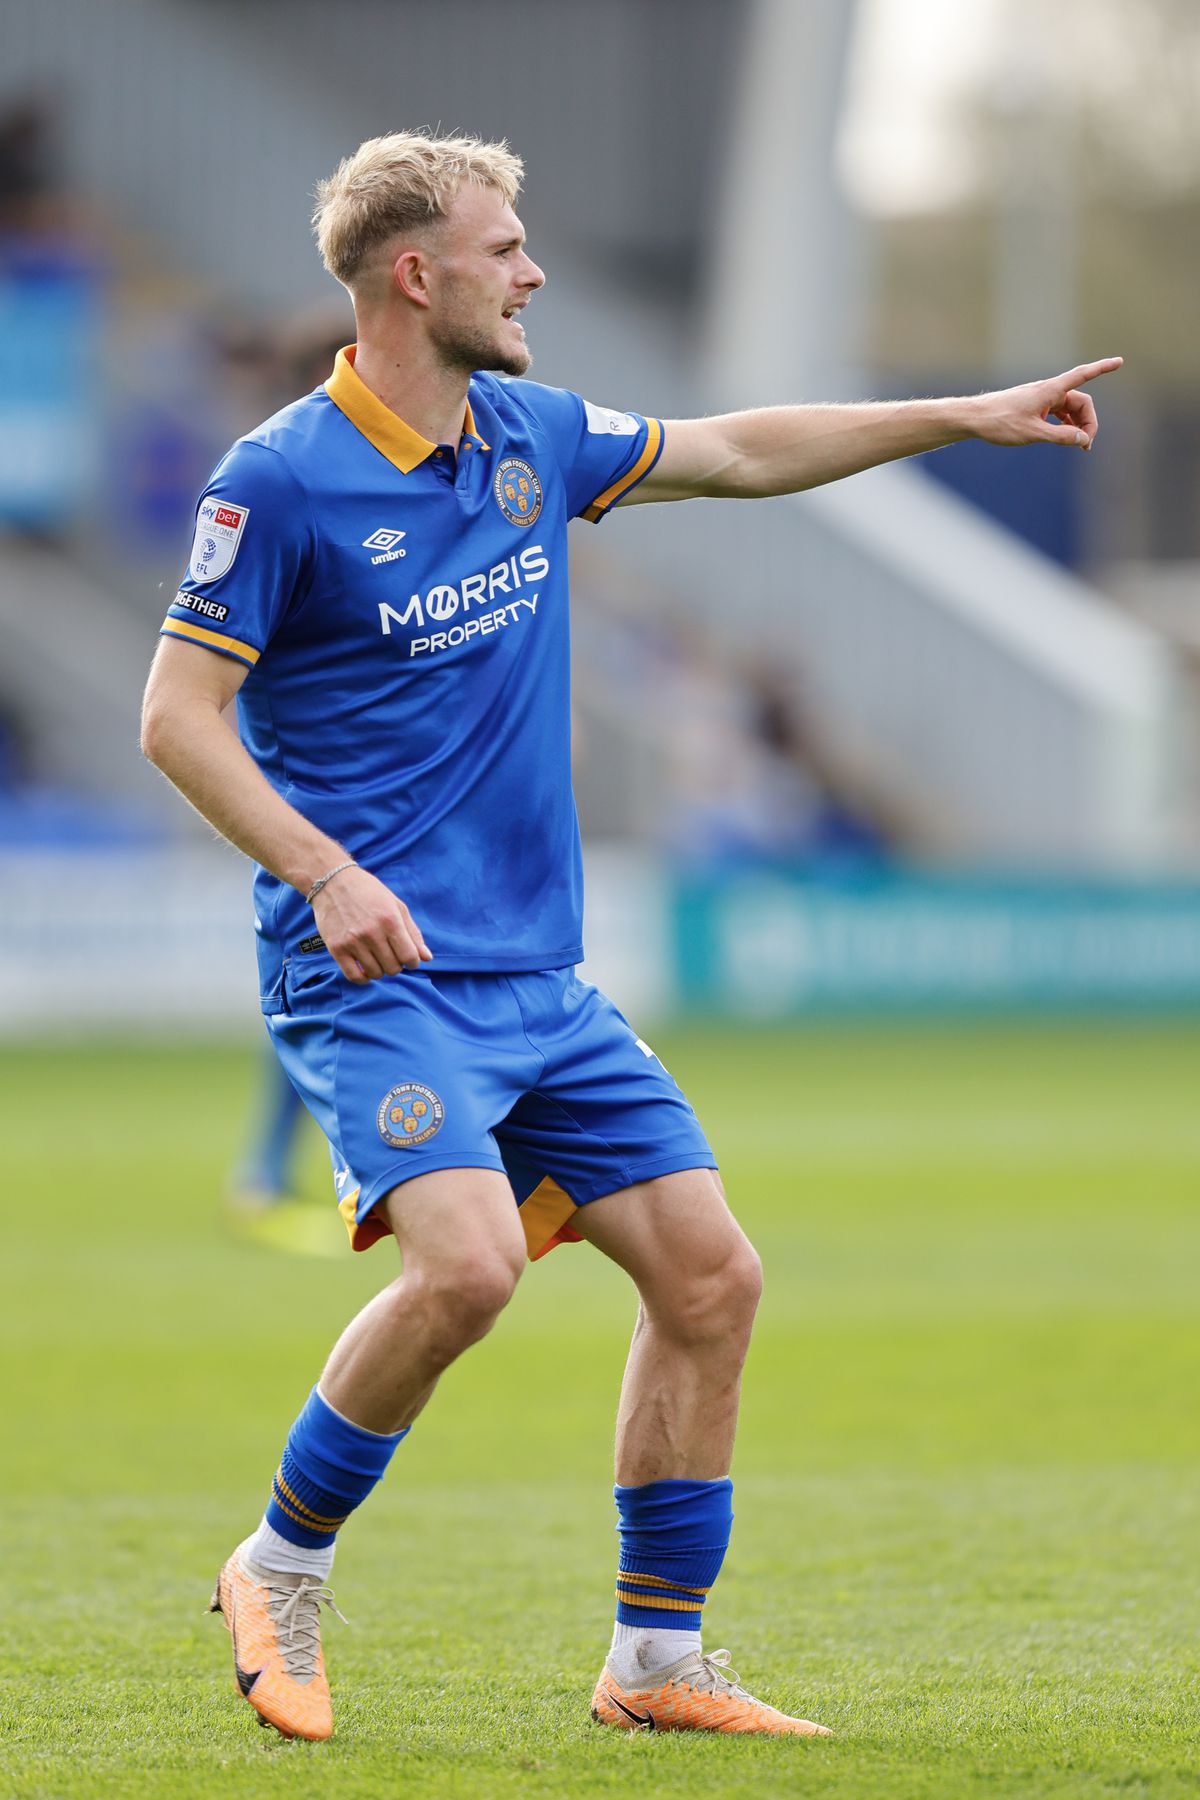 Taylor Perry of Shrewsbury Town. (AMA)